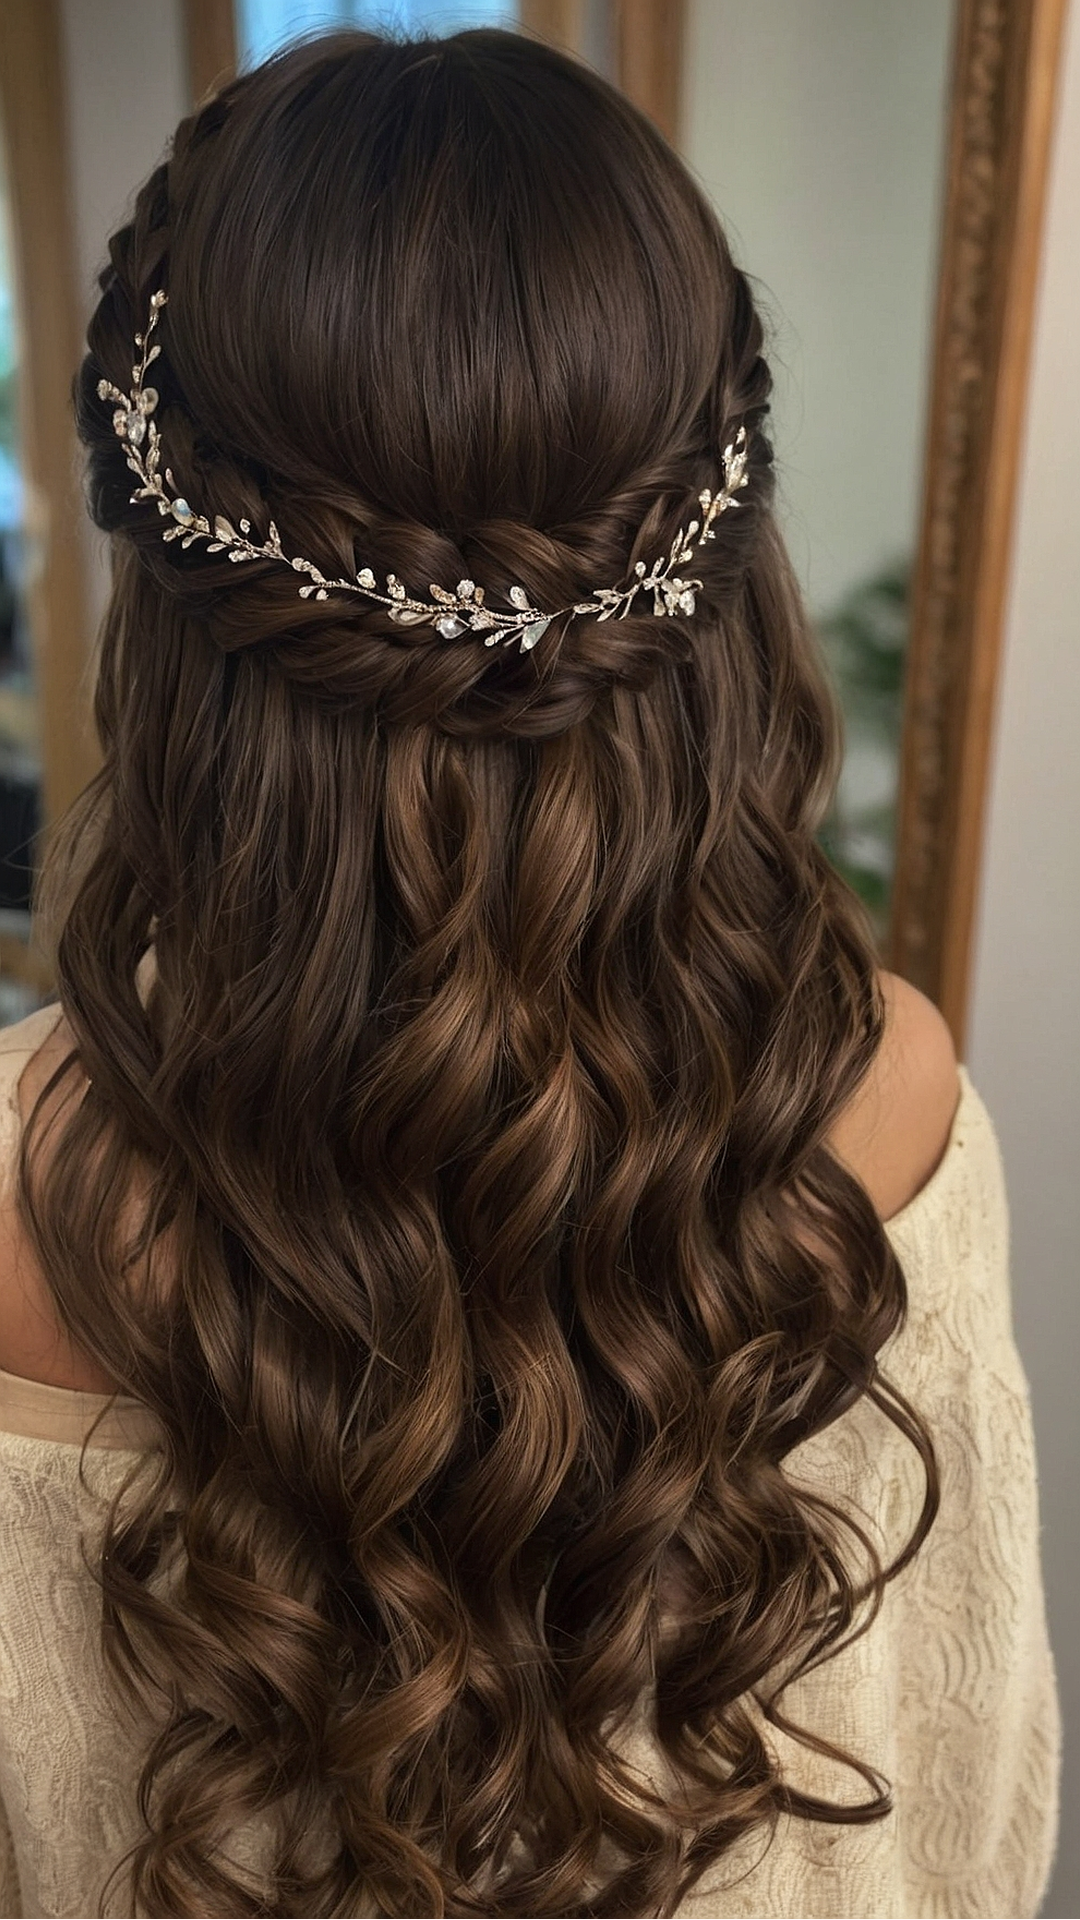 Captivating Half-Up Half-Down Prom Hairstyles